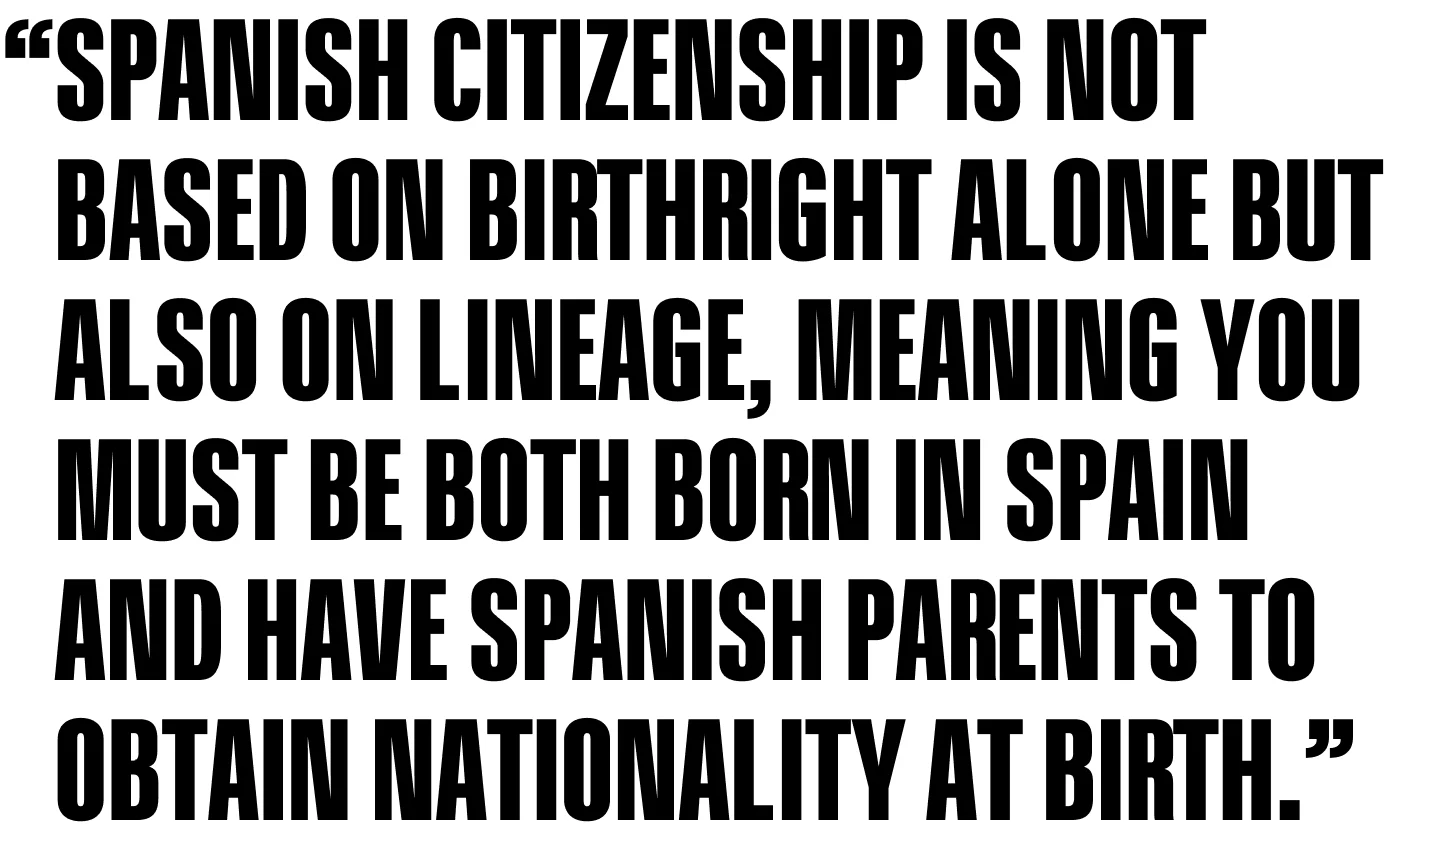 Spanish citizenship is not based on birthright alone but also on lineage, meaning you must be both born in Spain and have Spanish parents to obtain nationality at birth.